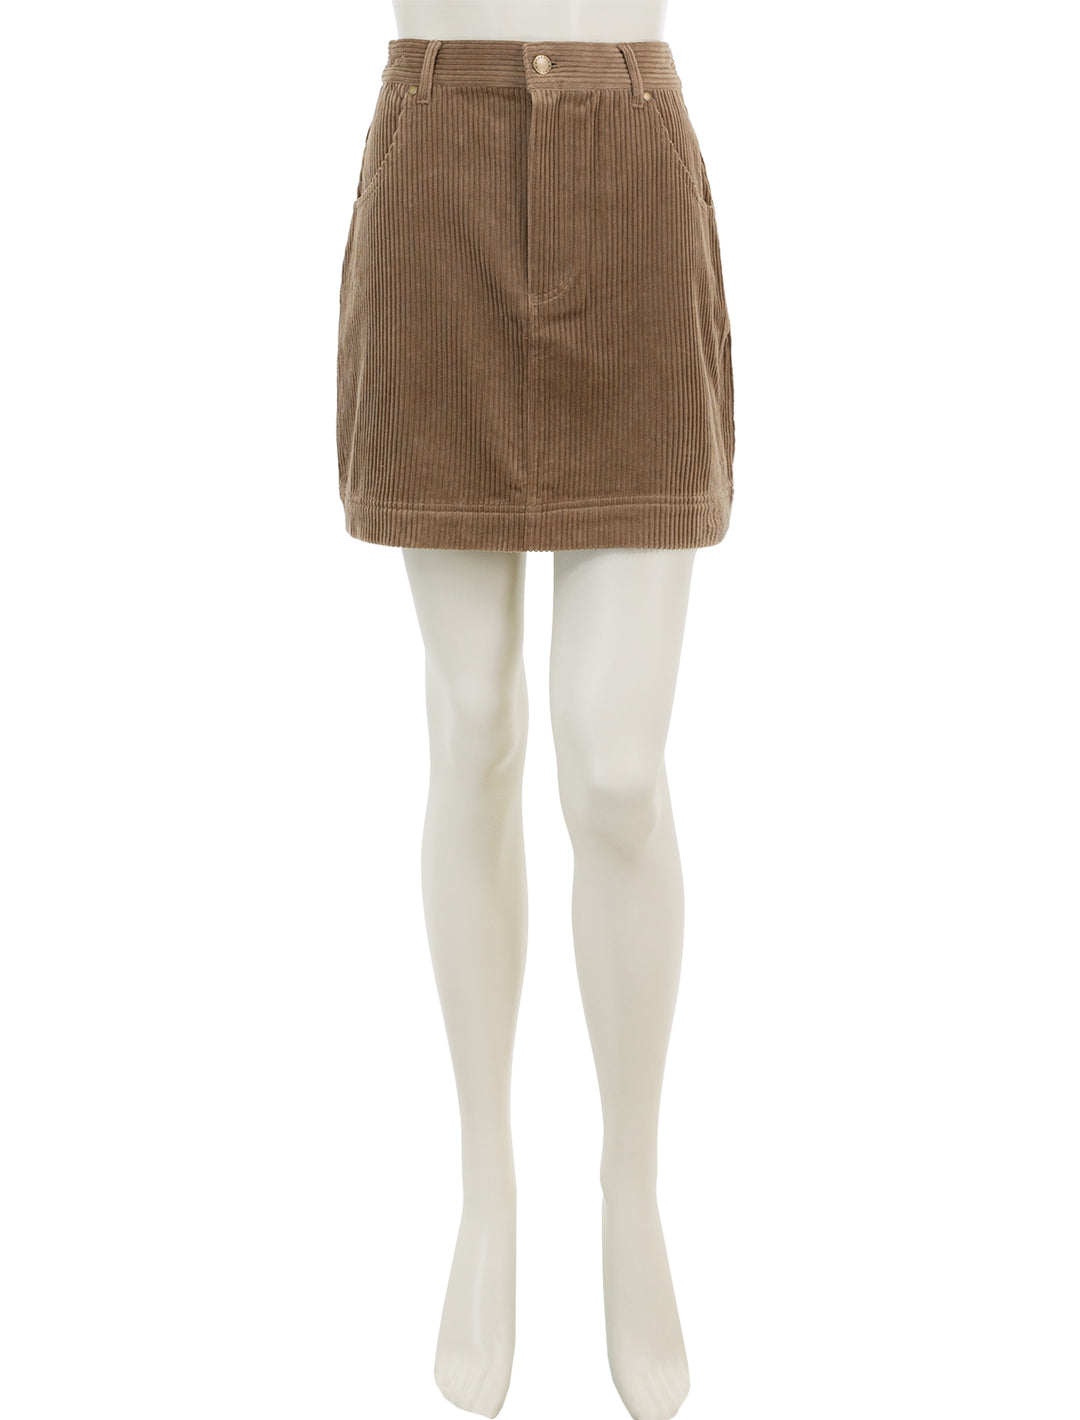 Front view of Barbour's oakfield skirt in taupe corduroy.